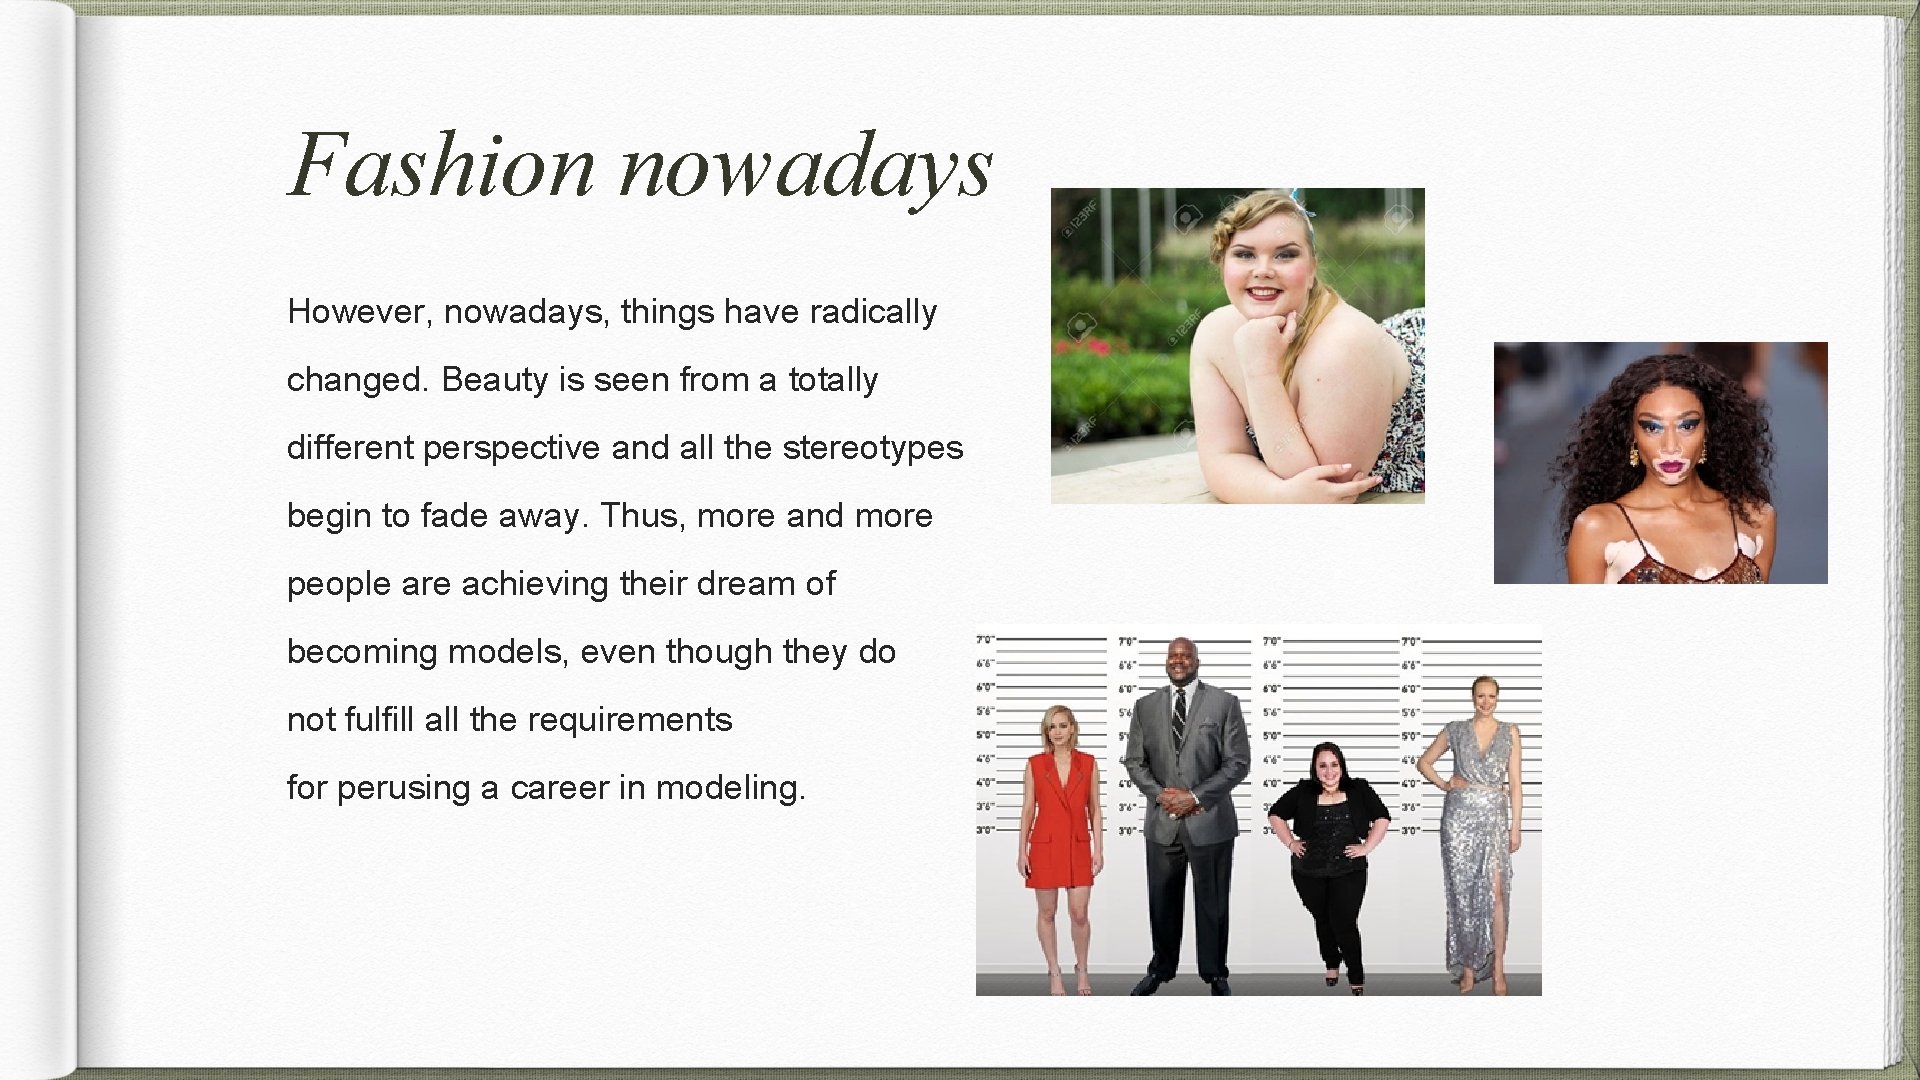 Fashion nowadays However, nowadays, things have radically changed. Beauty is seen from a totally